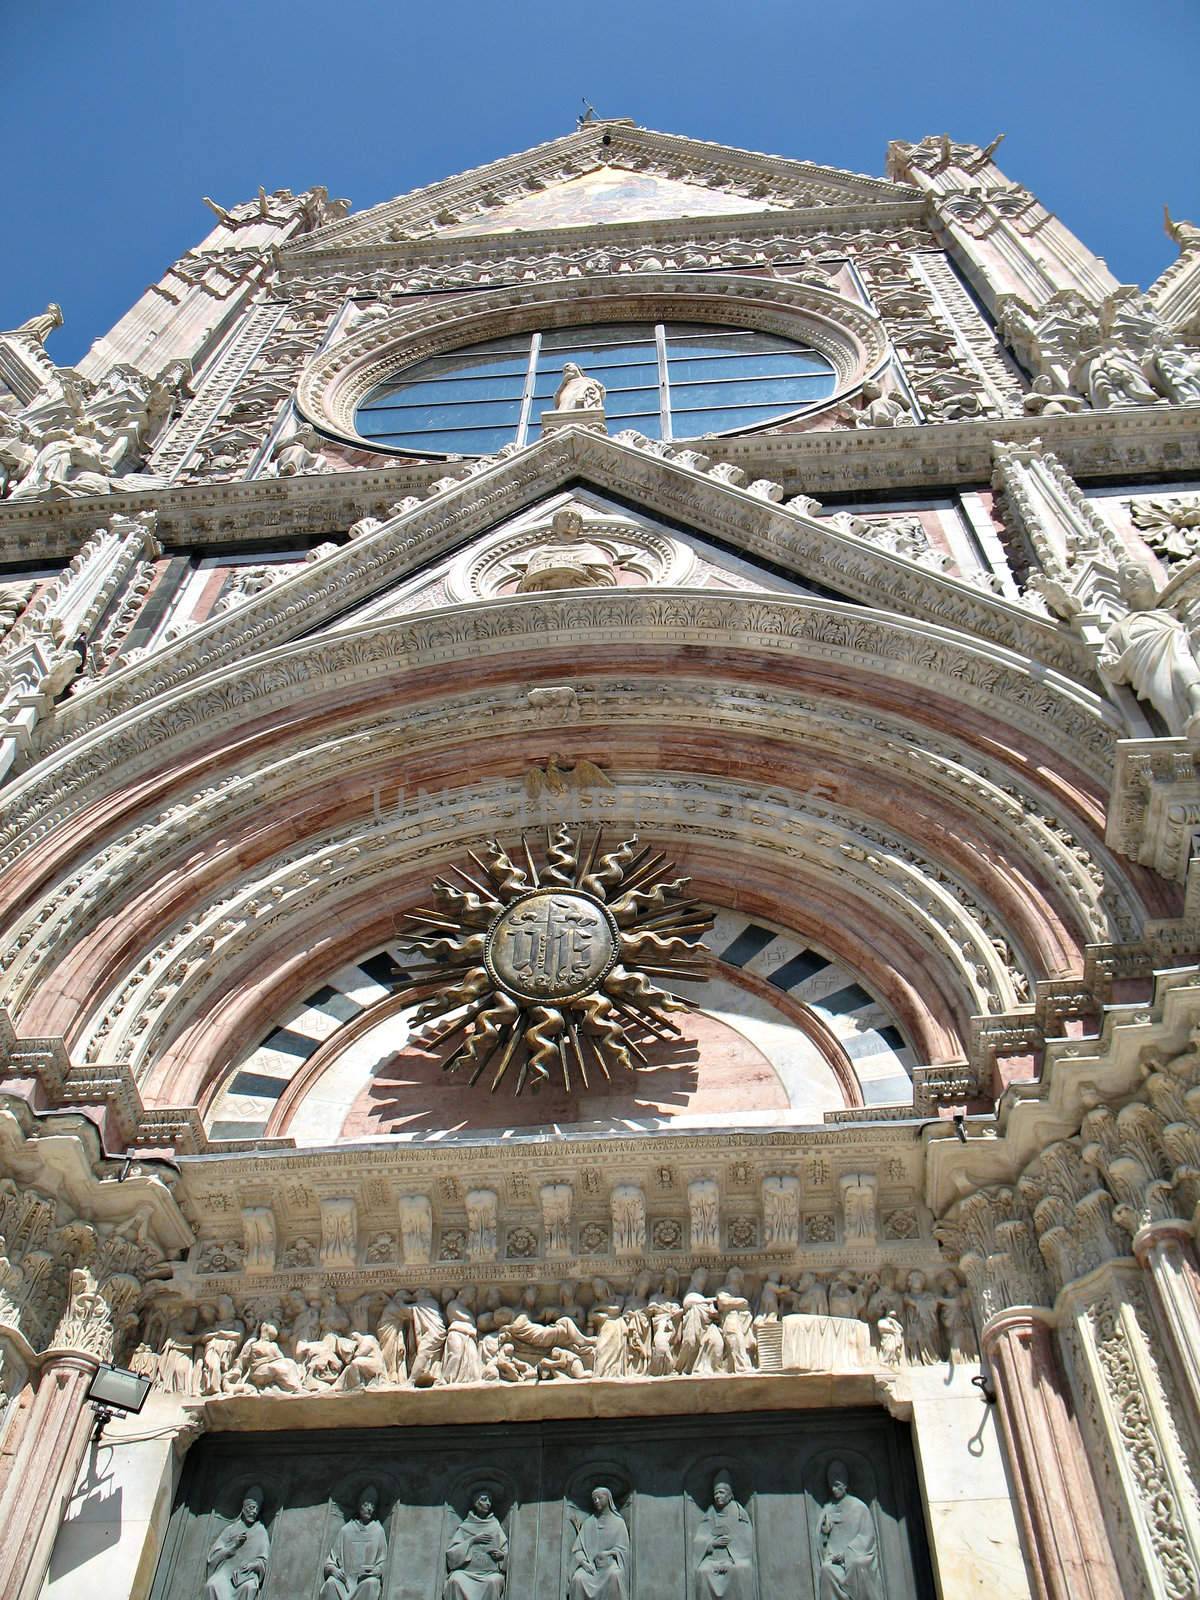 The amazing view of the front of the Duomo in Siena (Santa Maria Assunta Cathedral), Tuscany, Italy.